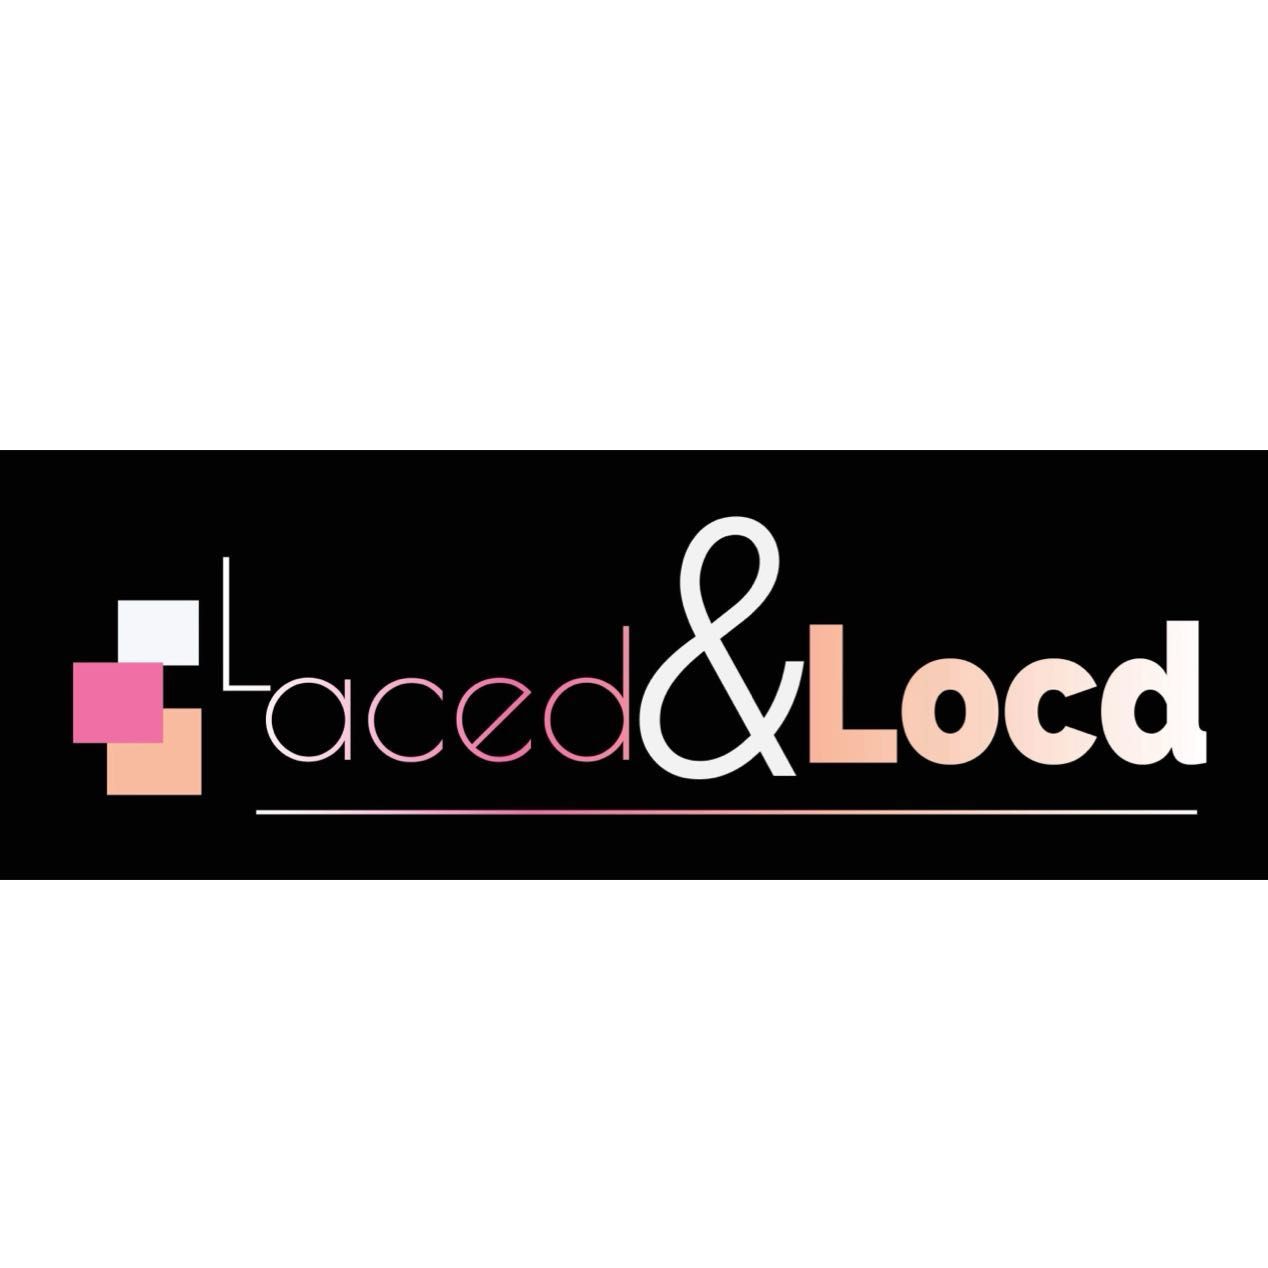 Laced and Locd, 111 Donelson Pike, 3, 2, Nashville, 37214